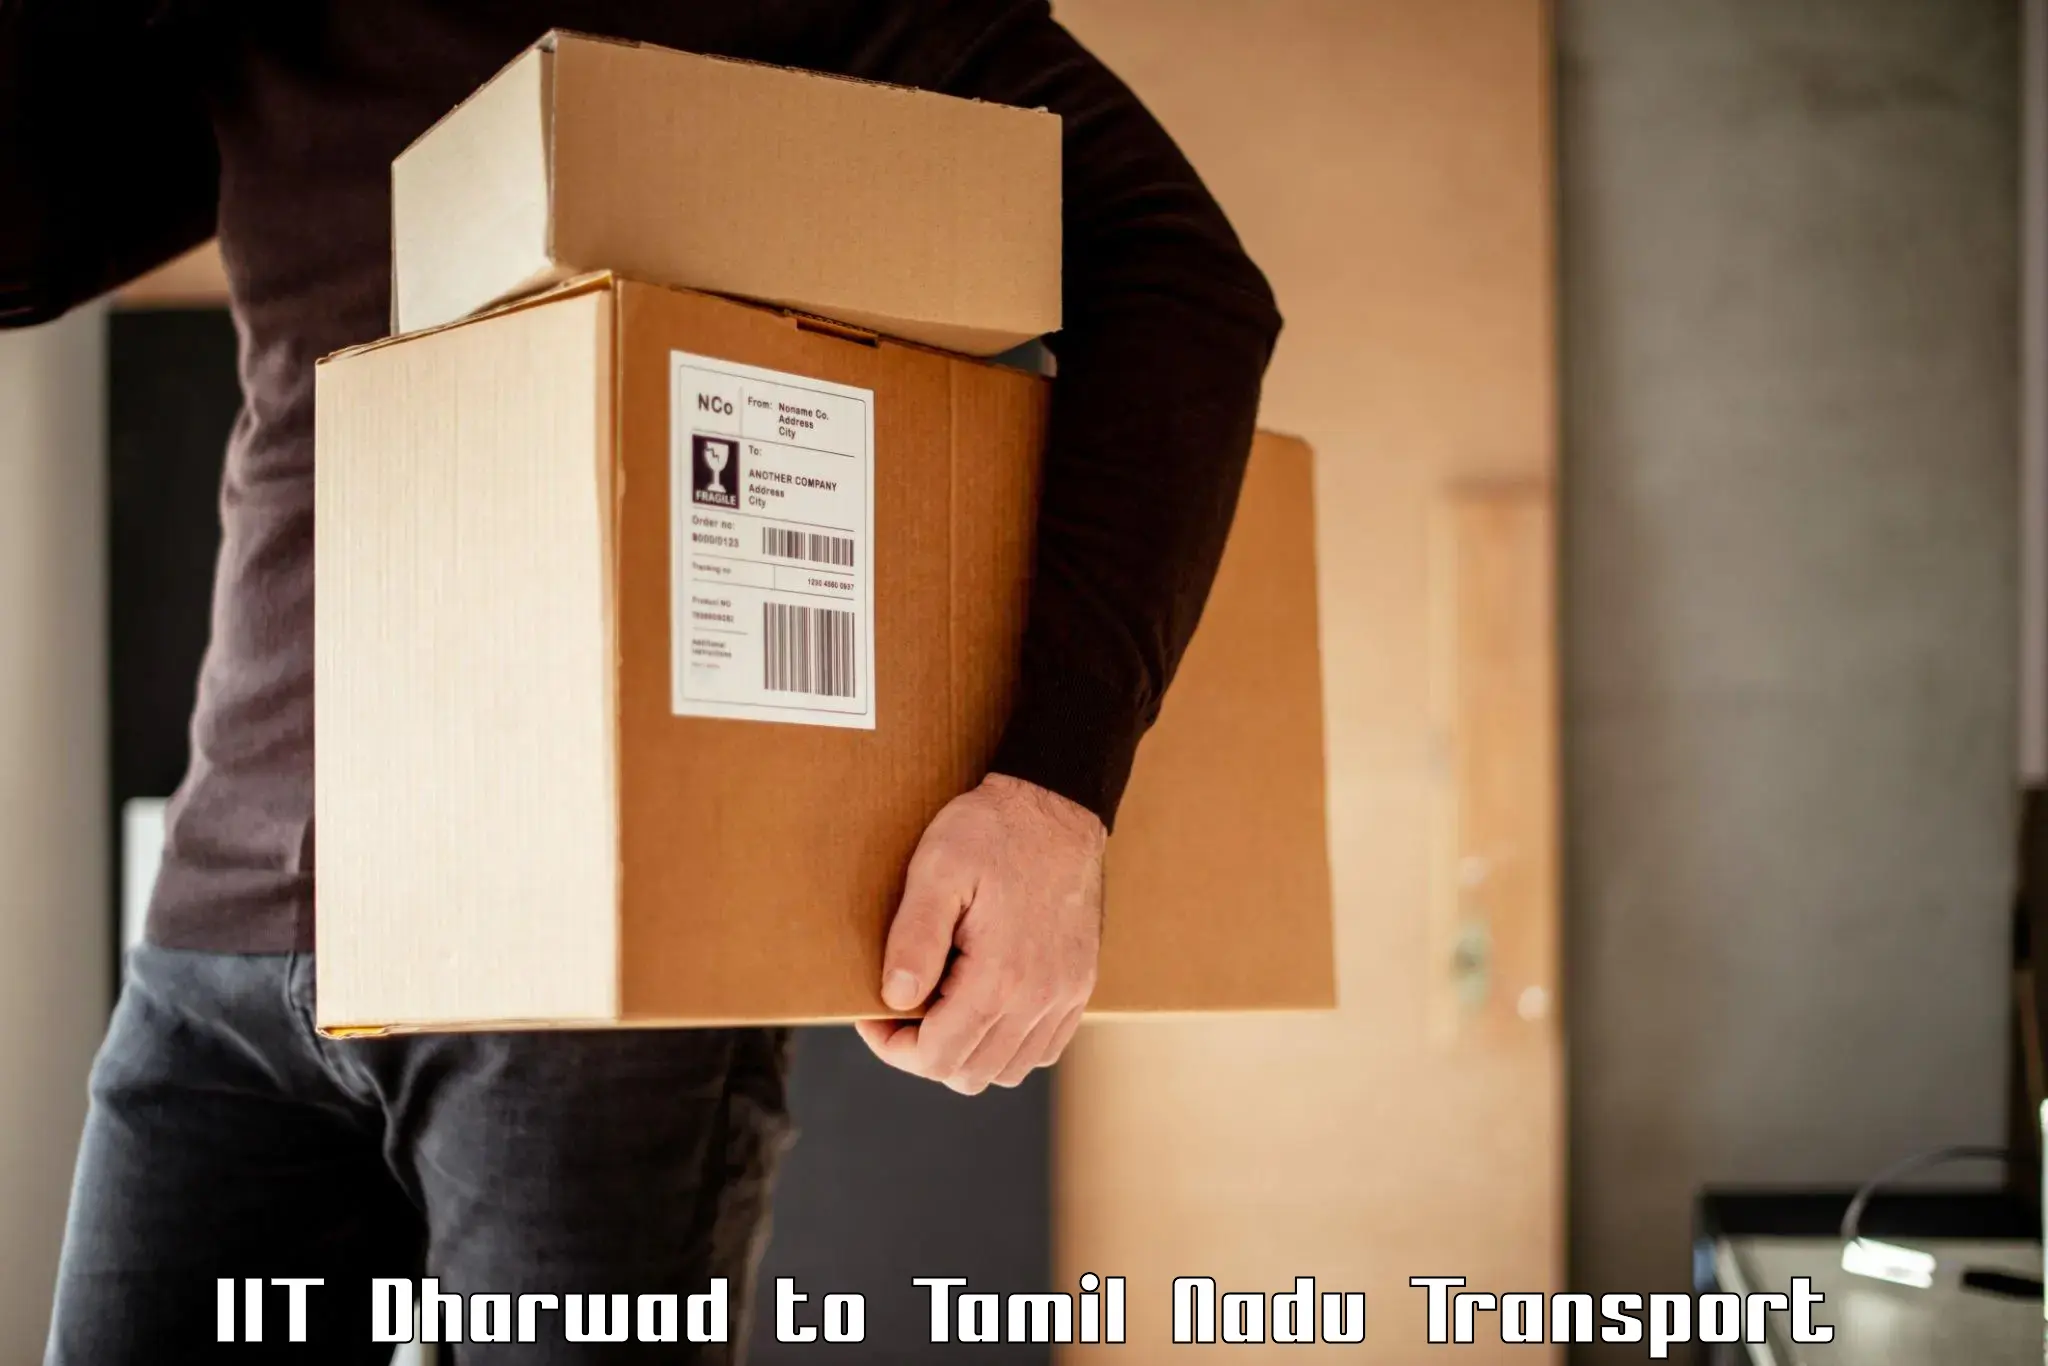 Vehicle transport services IIT Dharwad to Hosur